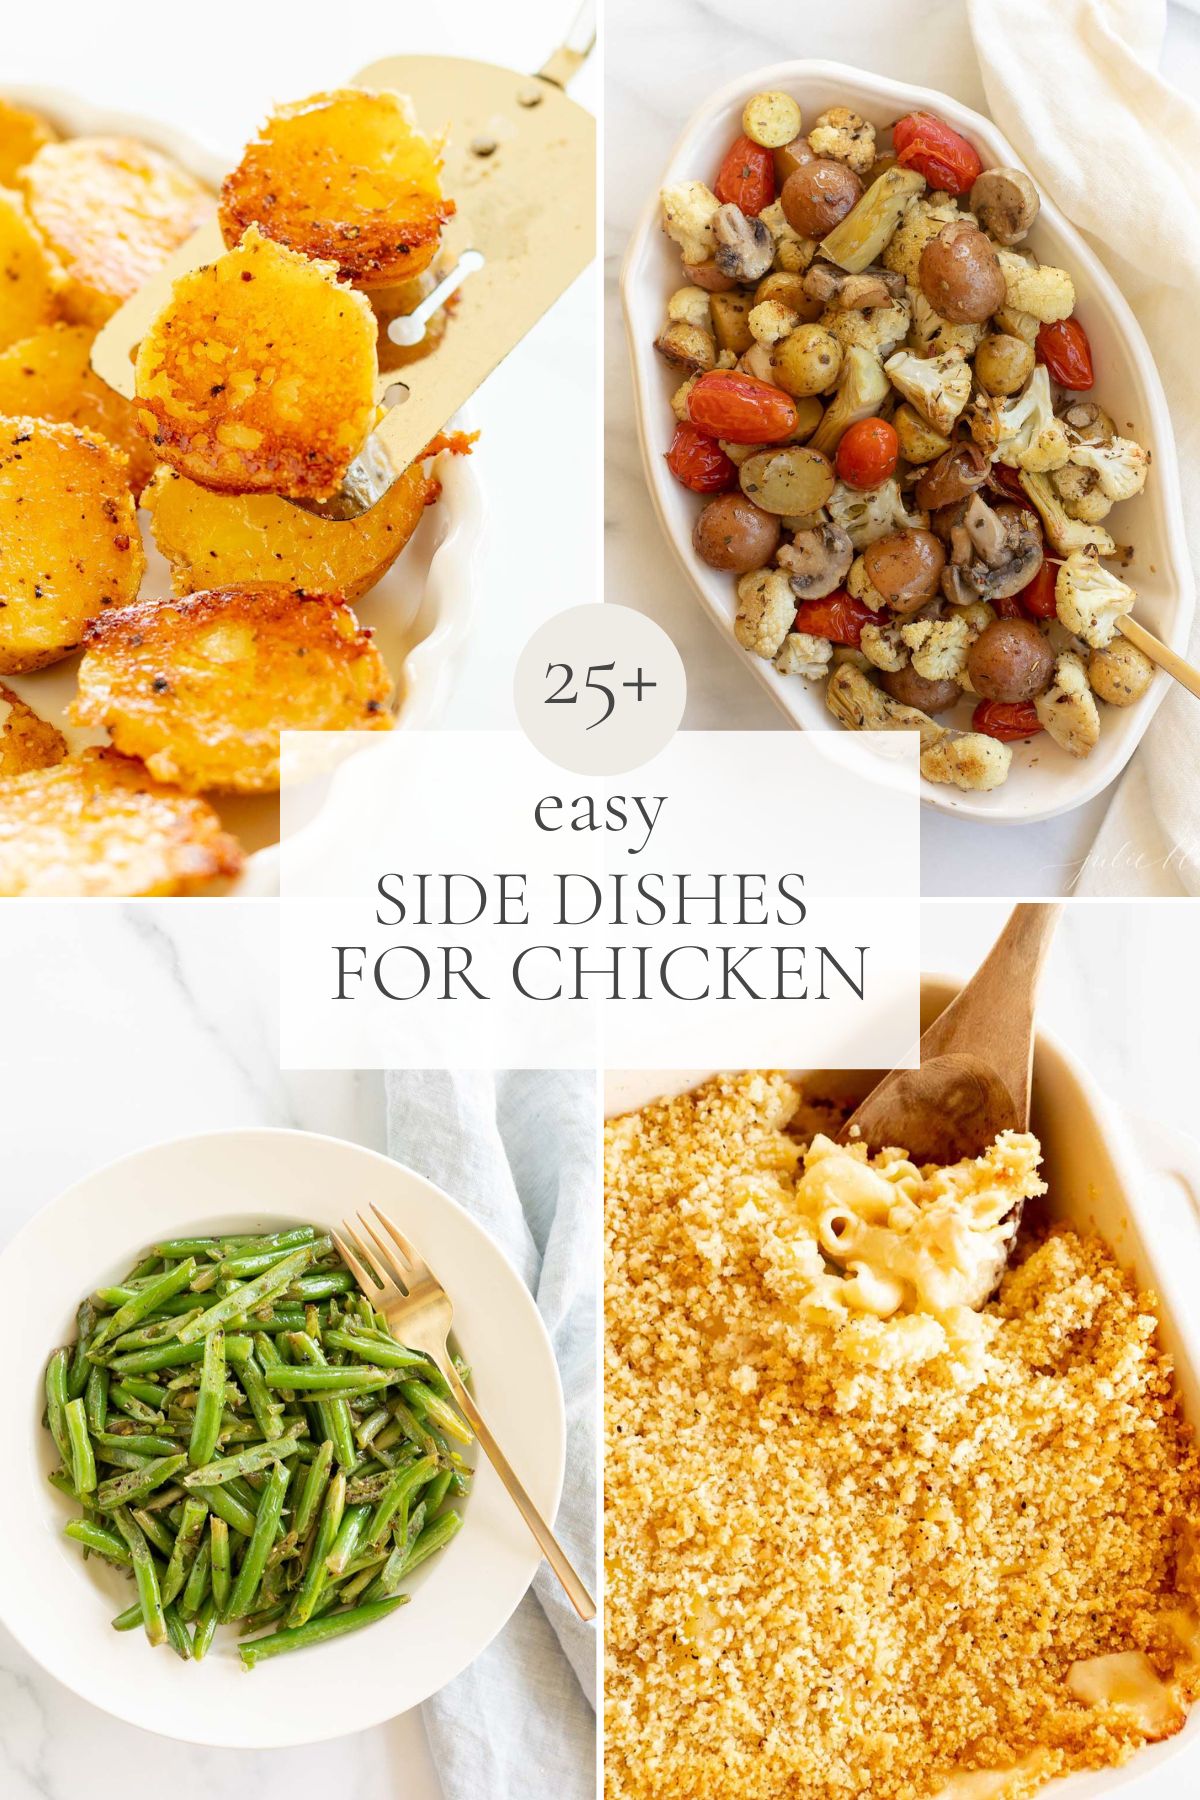 A graphic compilation of four images of side dish recipes, title reads "25+ Easy Side Dishes for Chicken" 